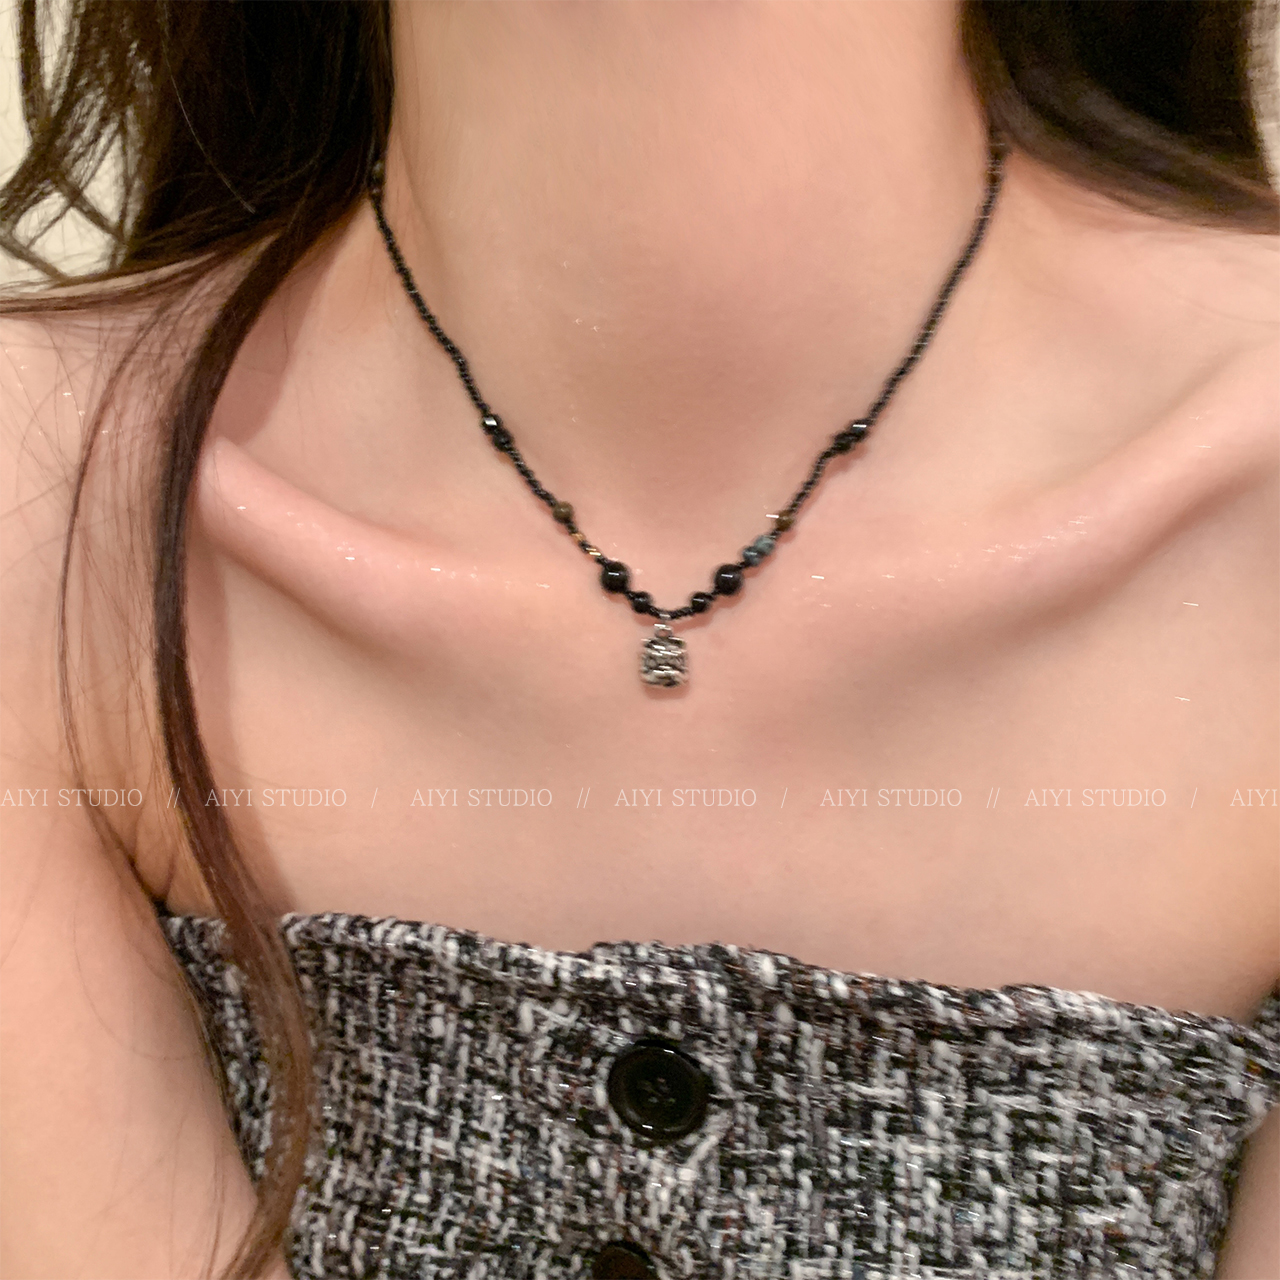 New Chinese style black necklace, sweet and cool, high-end design sense, collarbone chain, ethnic style, light luxury, niche retro neckchain, girl